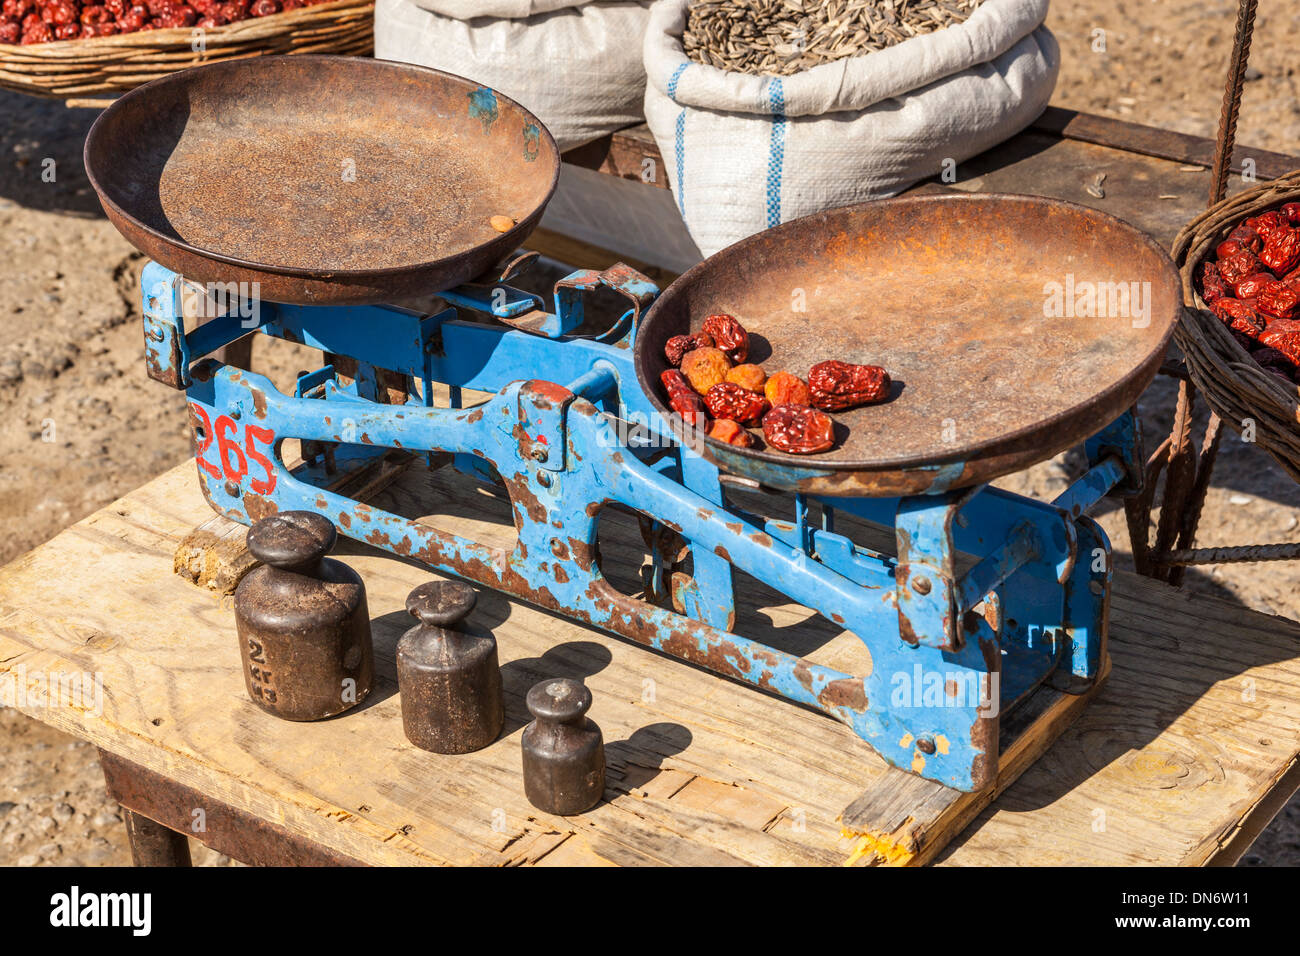 Old weighing scales and weights in an outdoor market, near Samarkand, Uzbekistan Stock Photo